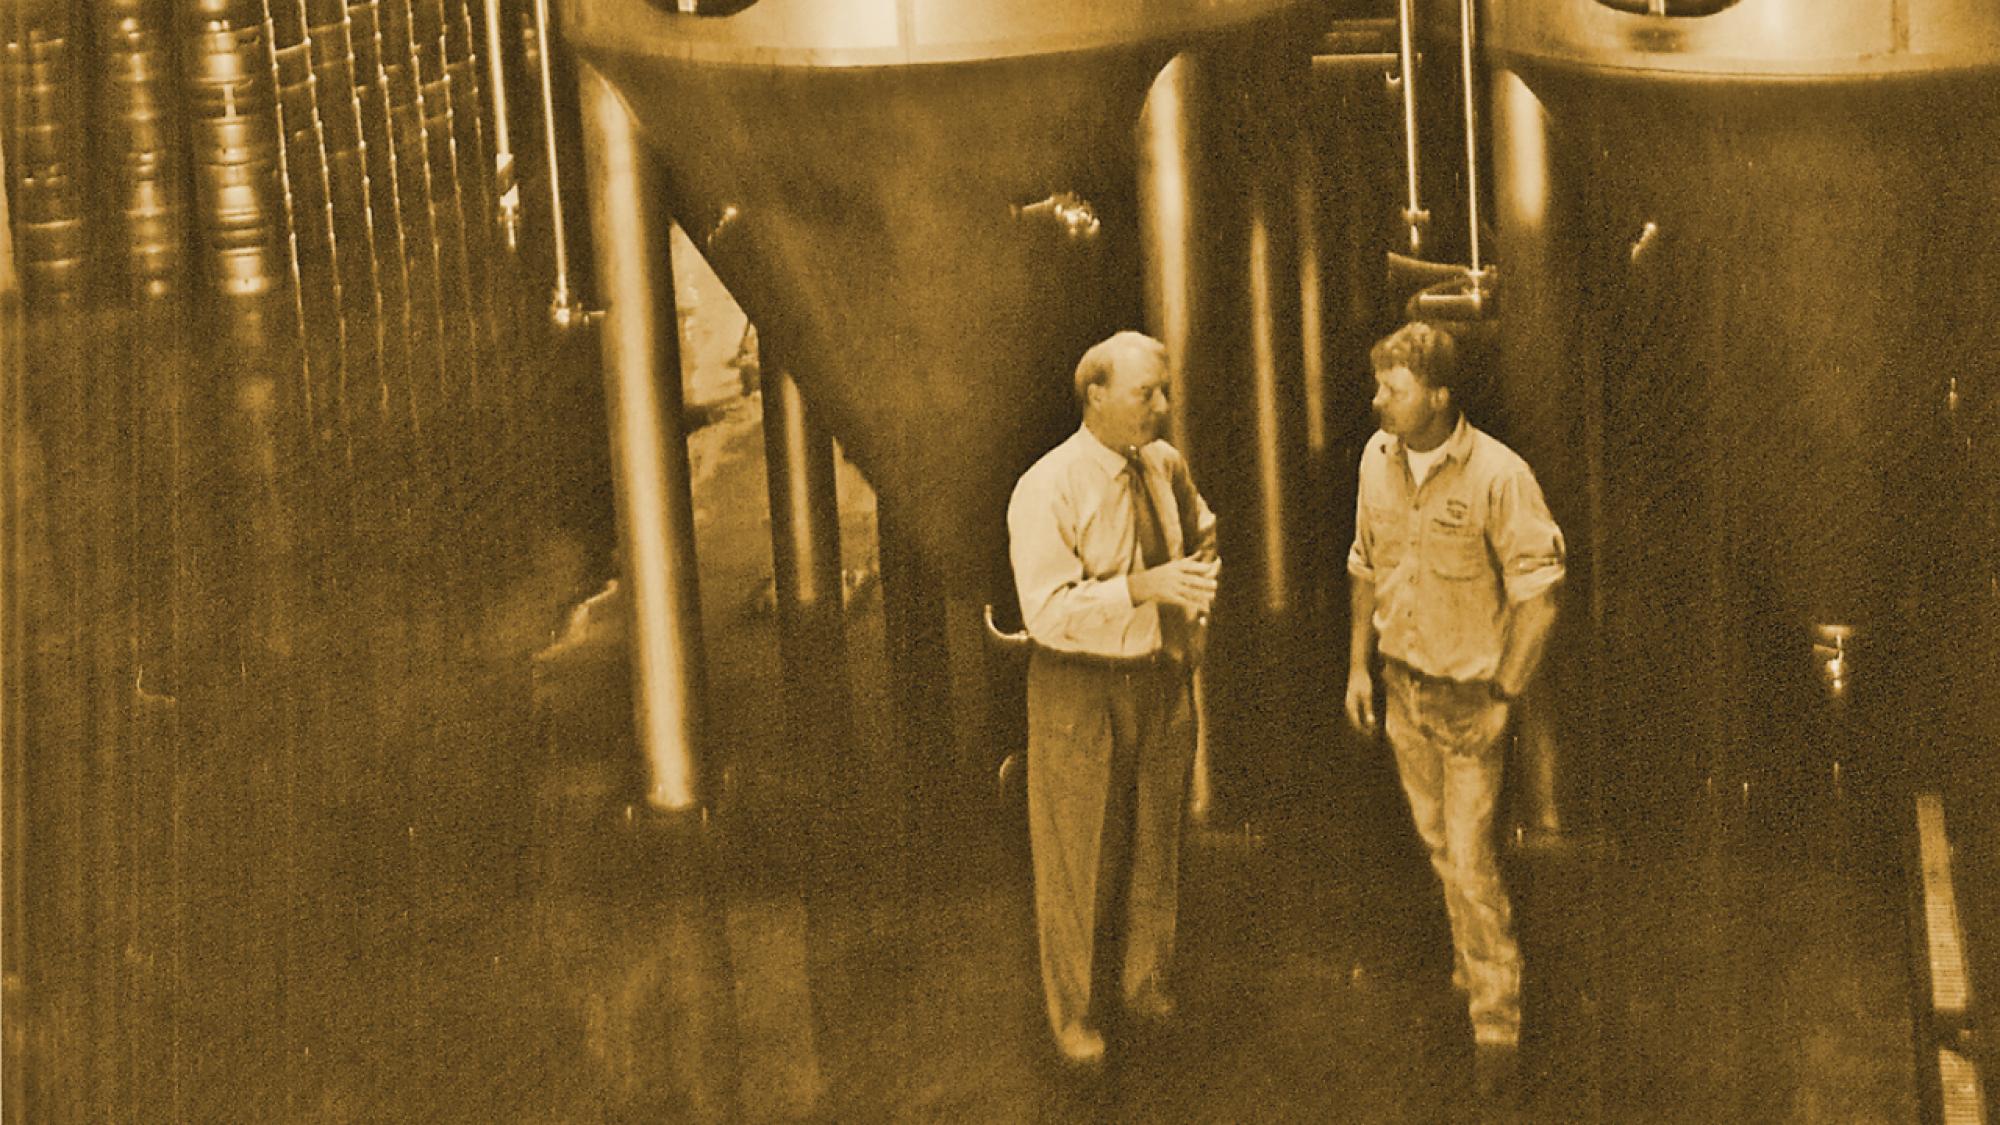 Michael Lewis and brewing tanks